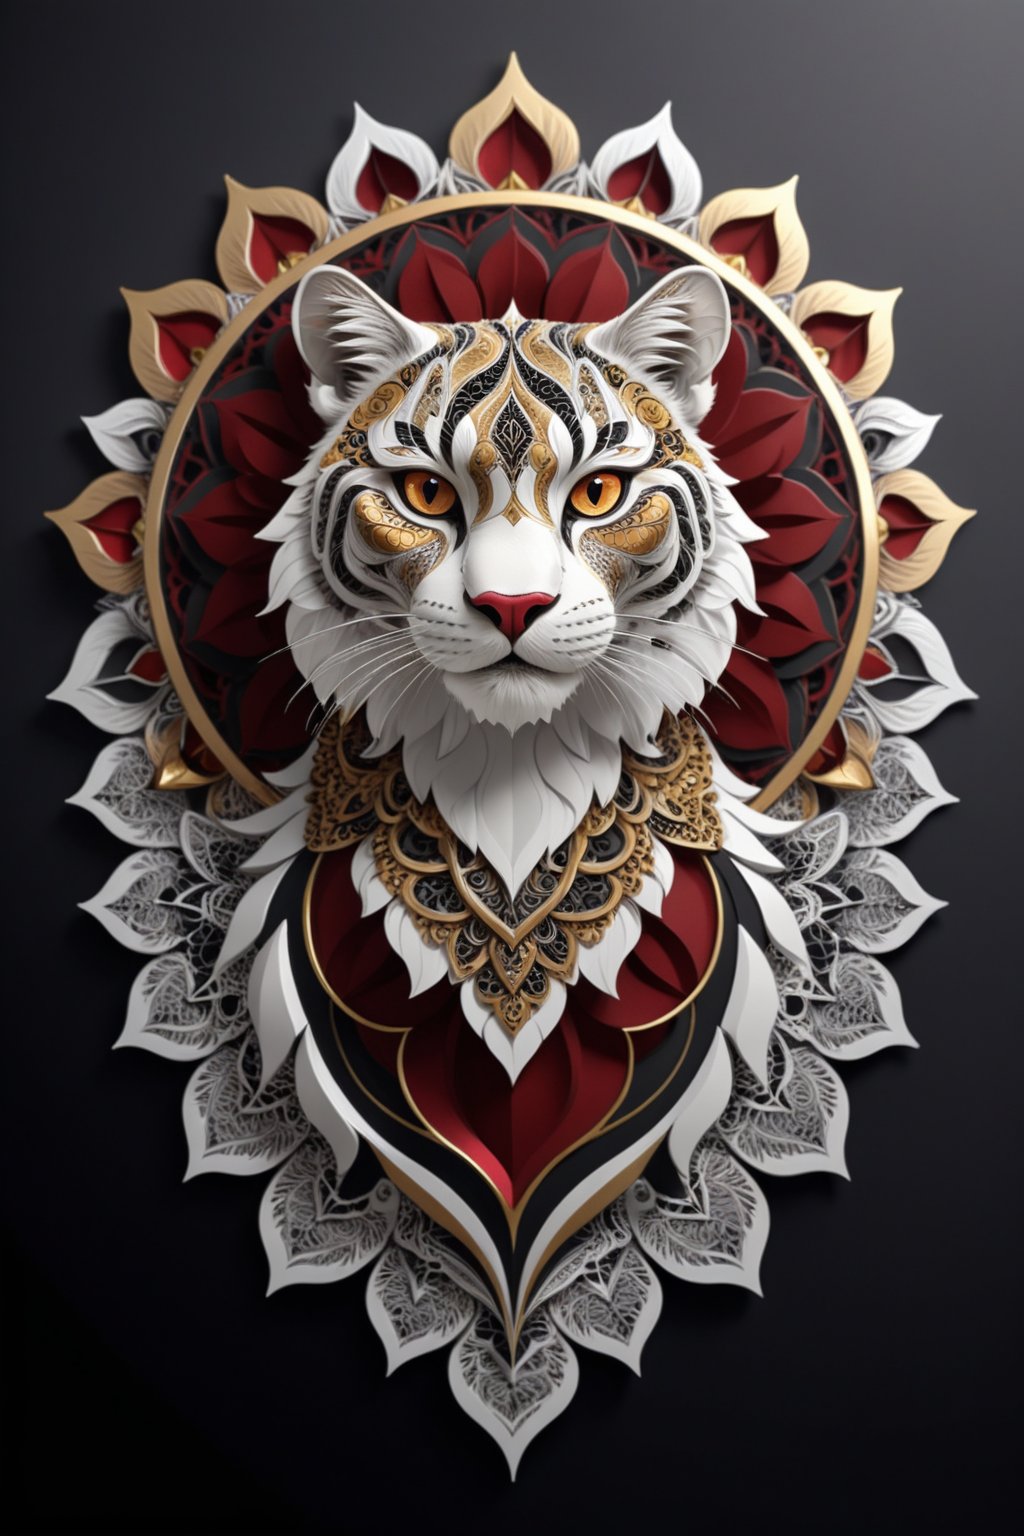 Official Art, Unity 8K Wallpaper, Super Detailed, Beautiful and Aesthetic, Masterpiece, Top Quality, (Zentangle, Mandala, Tangle, Tangle), (Fractal Art: 1.3), One big cat, Highly Detailed, Dynamic Angle,{{{ full body shot}}}, the most beautiful form chaos, elegant, brutalist design, bright Gold, Silver, Bronze, Black, Deep Red, romanticism